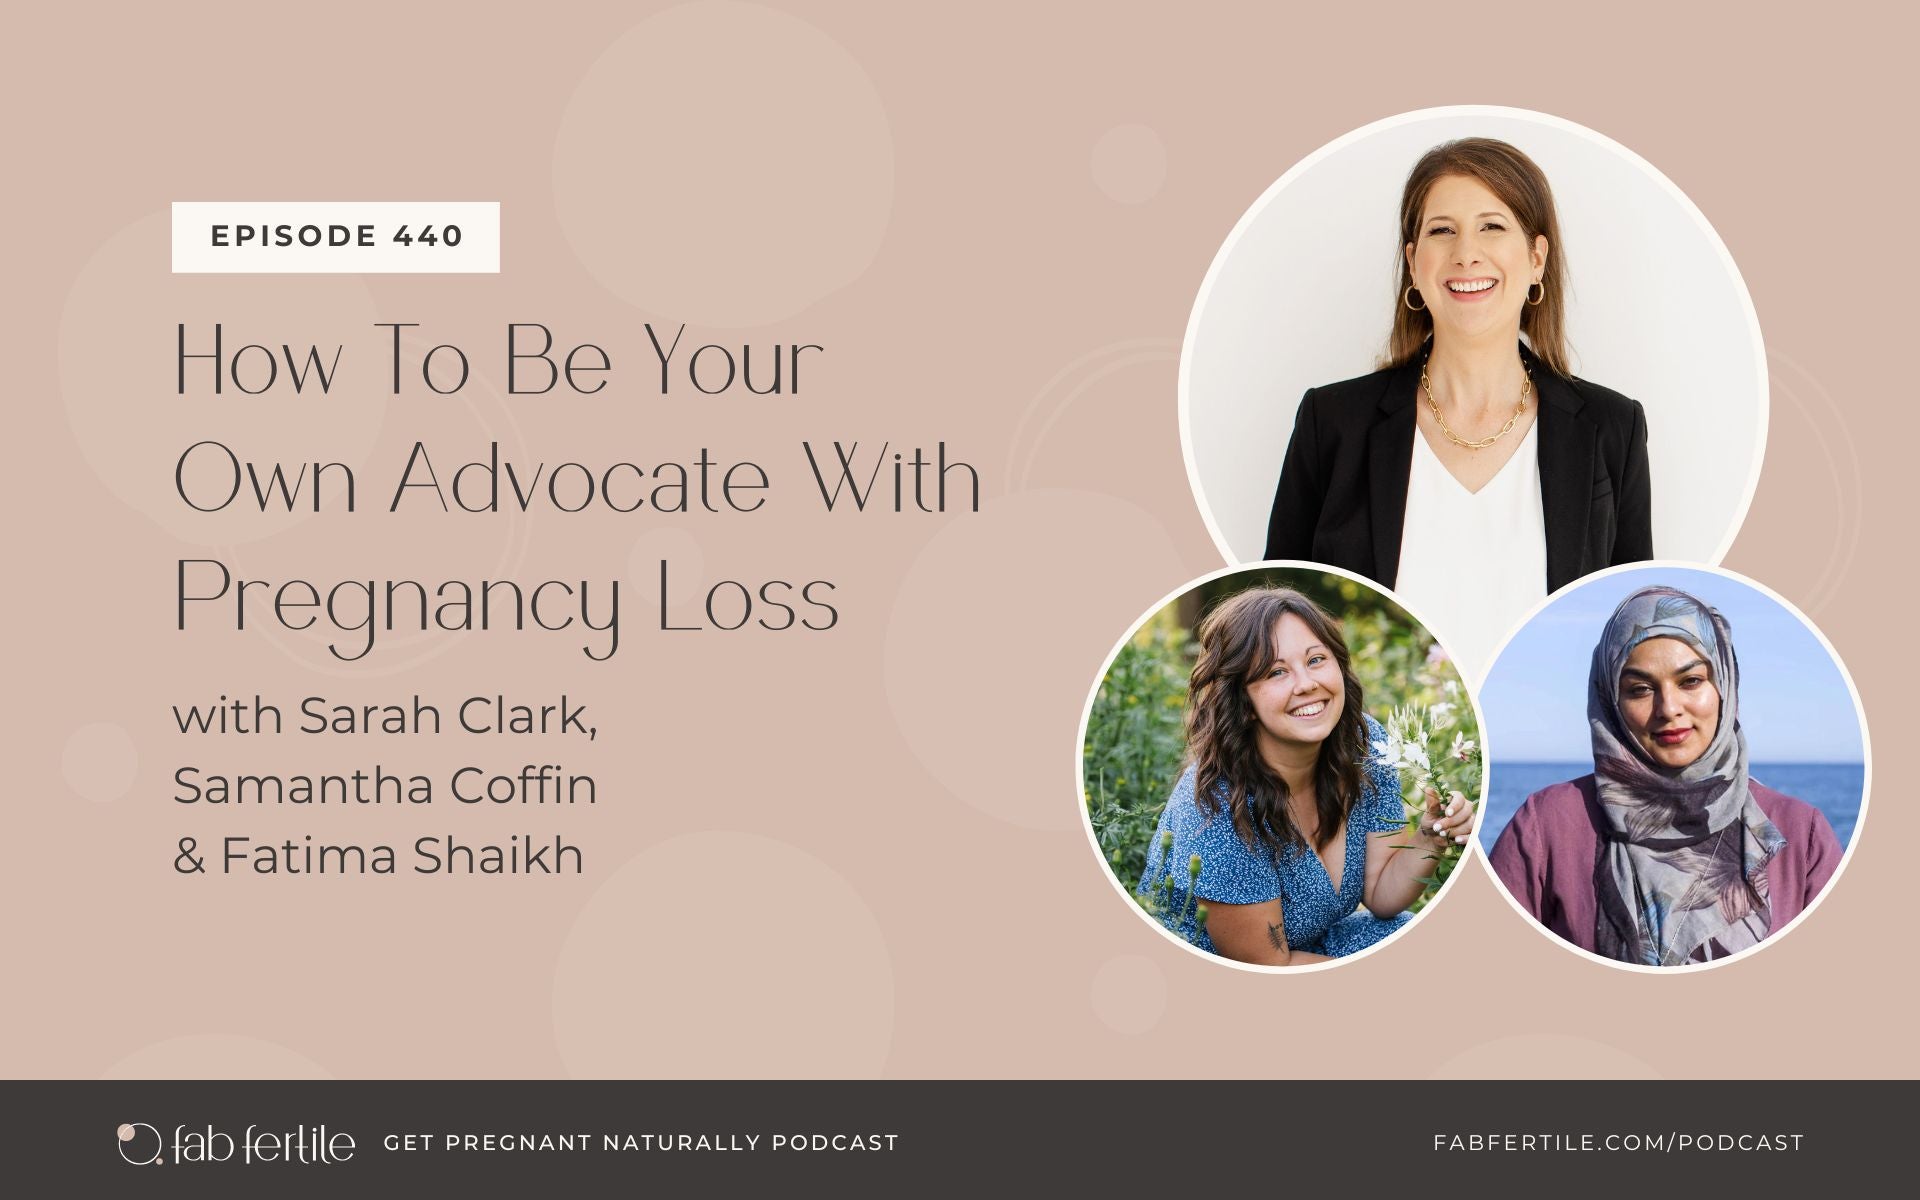 How To Be Your Own Advocate With Pregnancy Loss